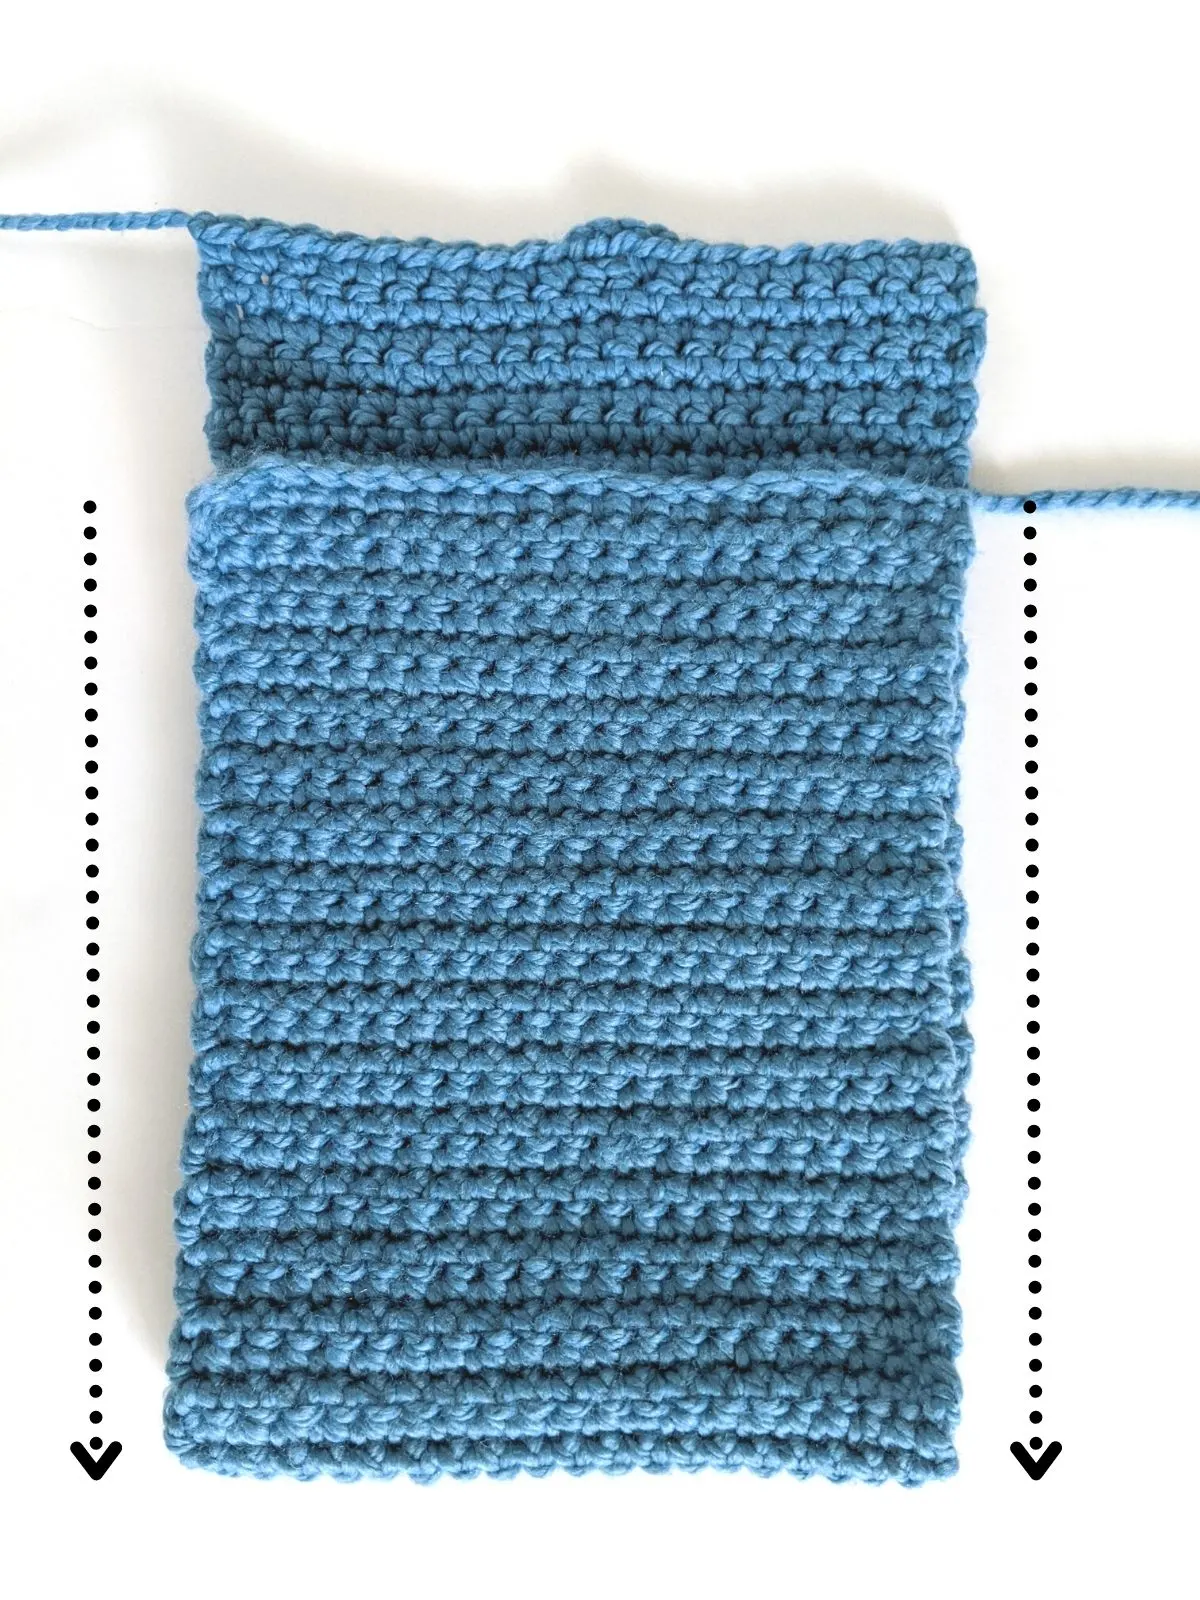 picture shows how to fold over your crochet rectangle to create a laptop cover